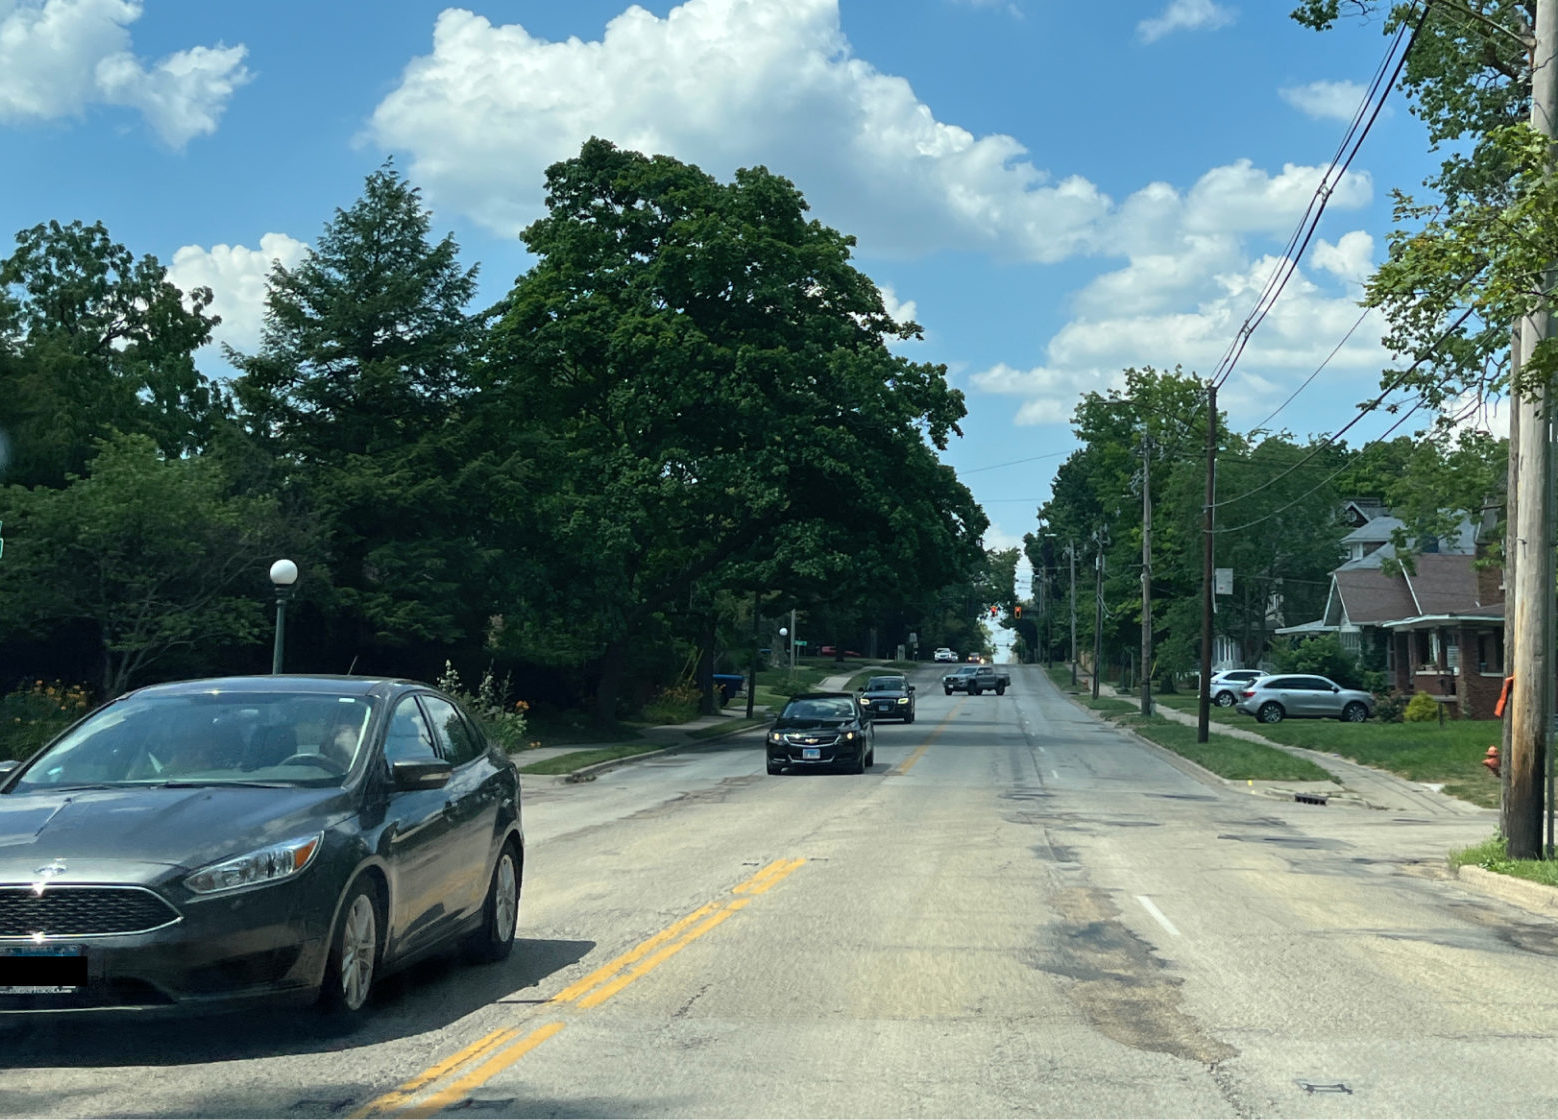 Prospect Avenue in Champaign, facing north. A four lane road is narrow, with many cars in the southbound lanes. The sky is blue and the trees are green; there are no other cars in the northbound lanes.